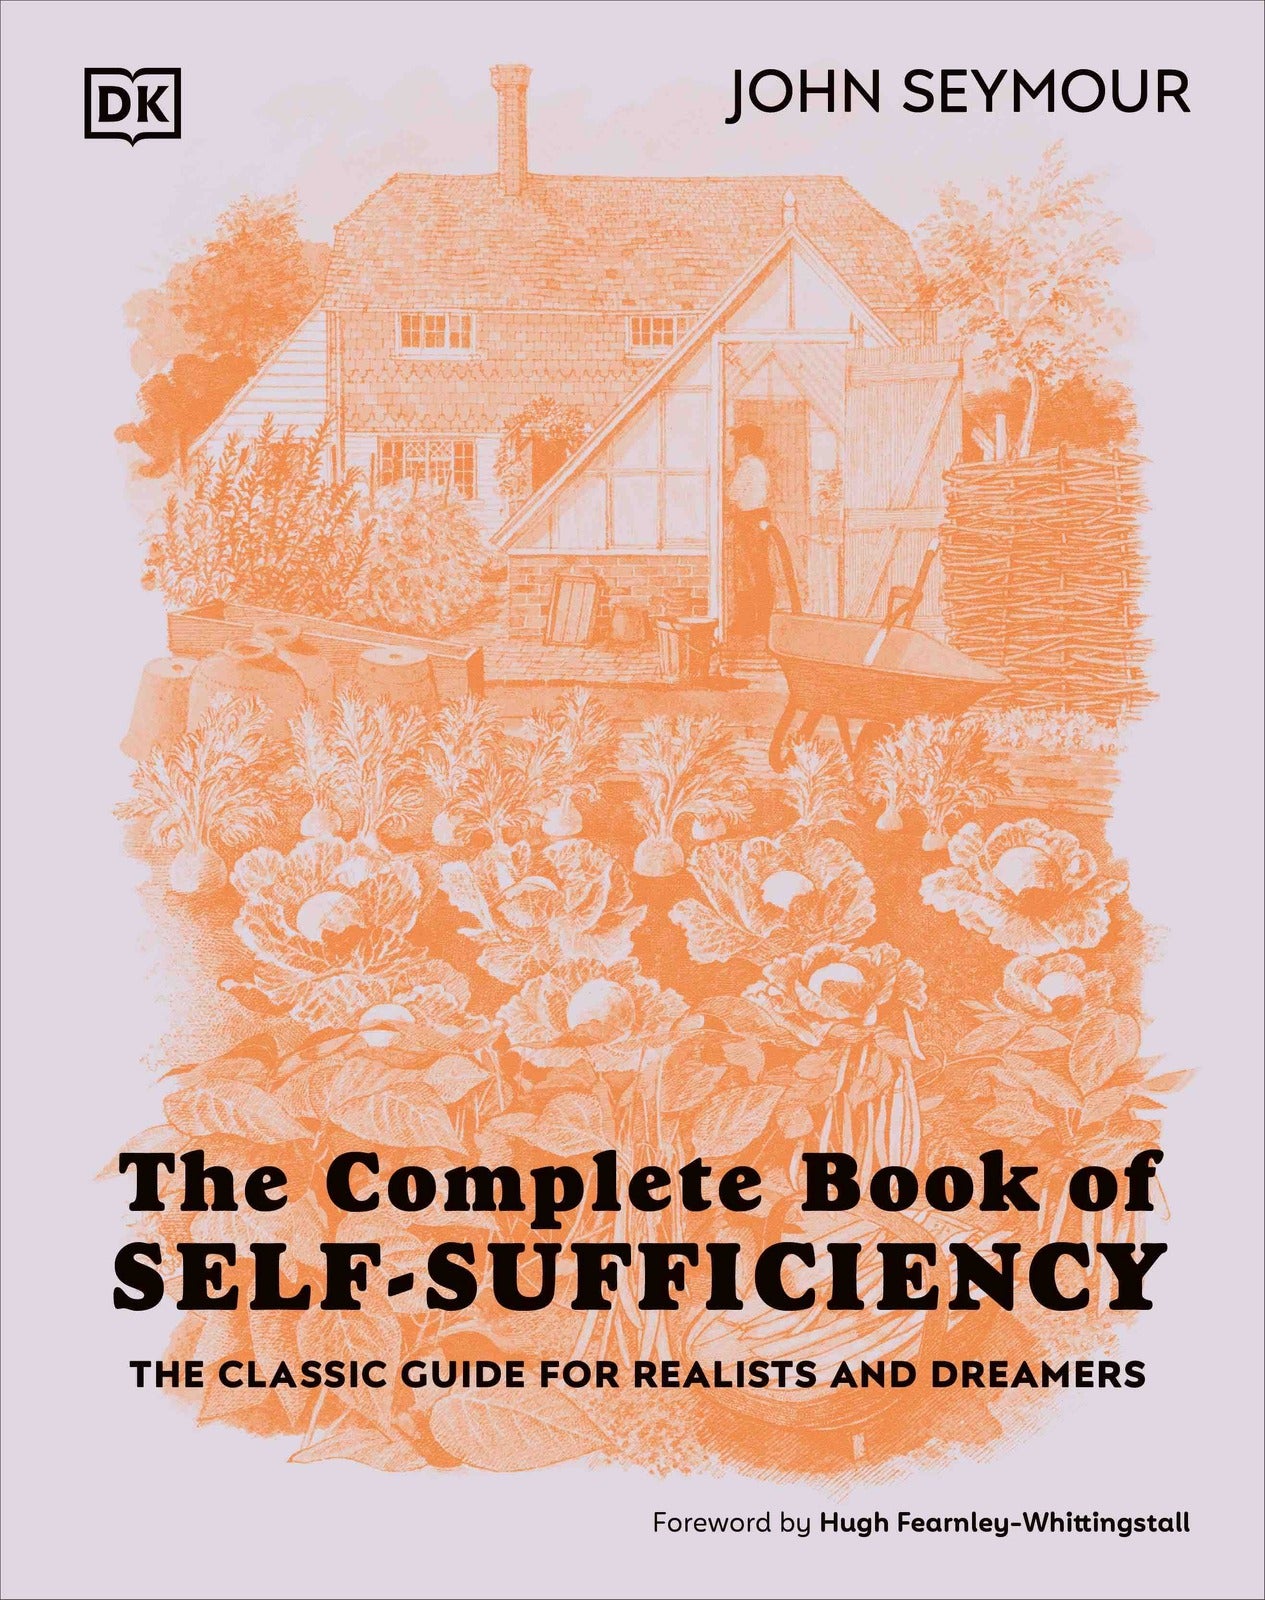 The Complete Book of Self-Sufficiency  John Seymour